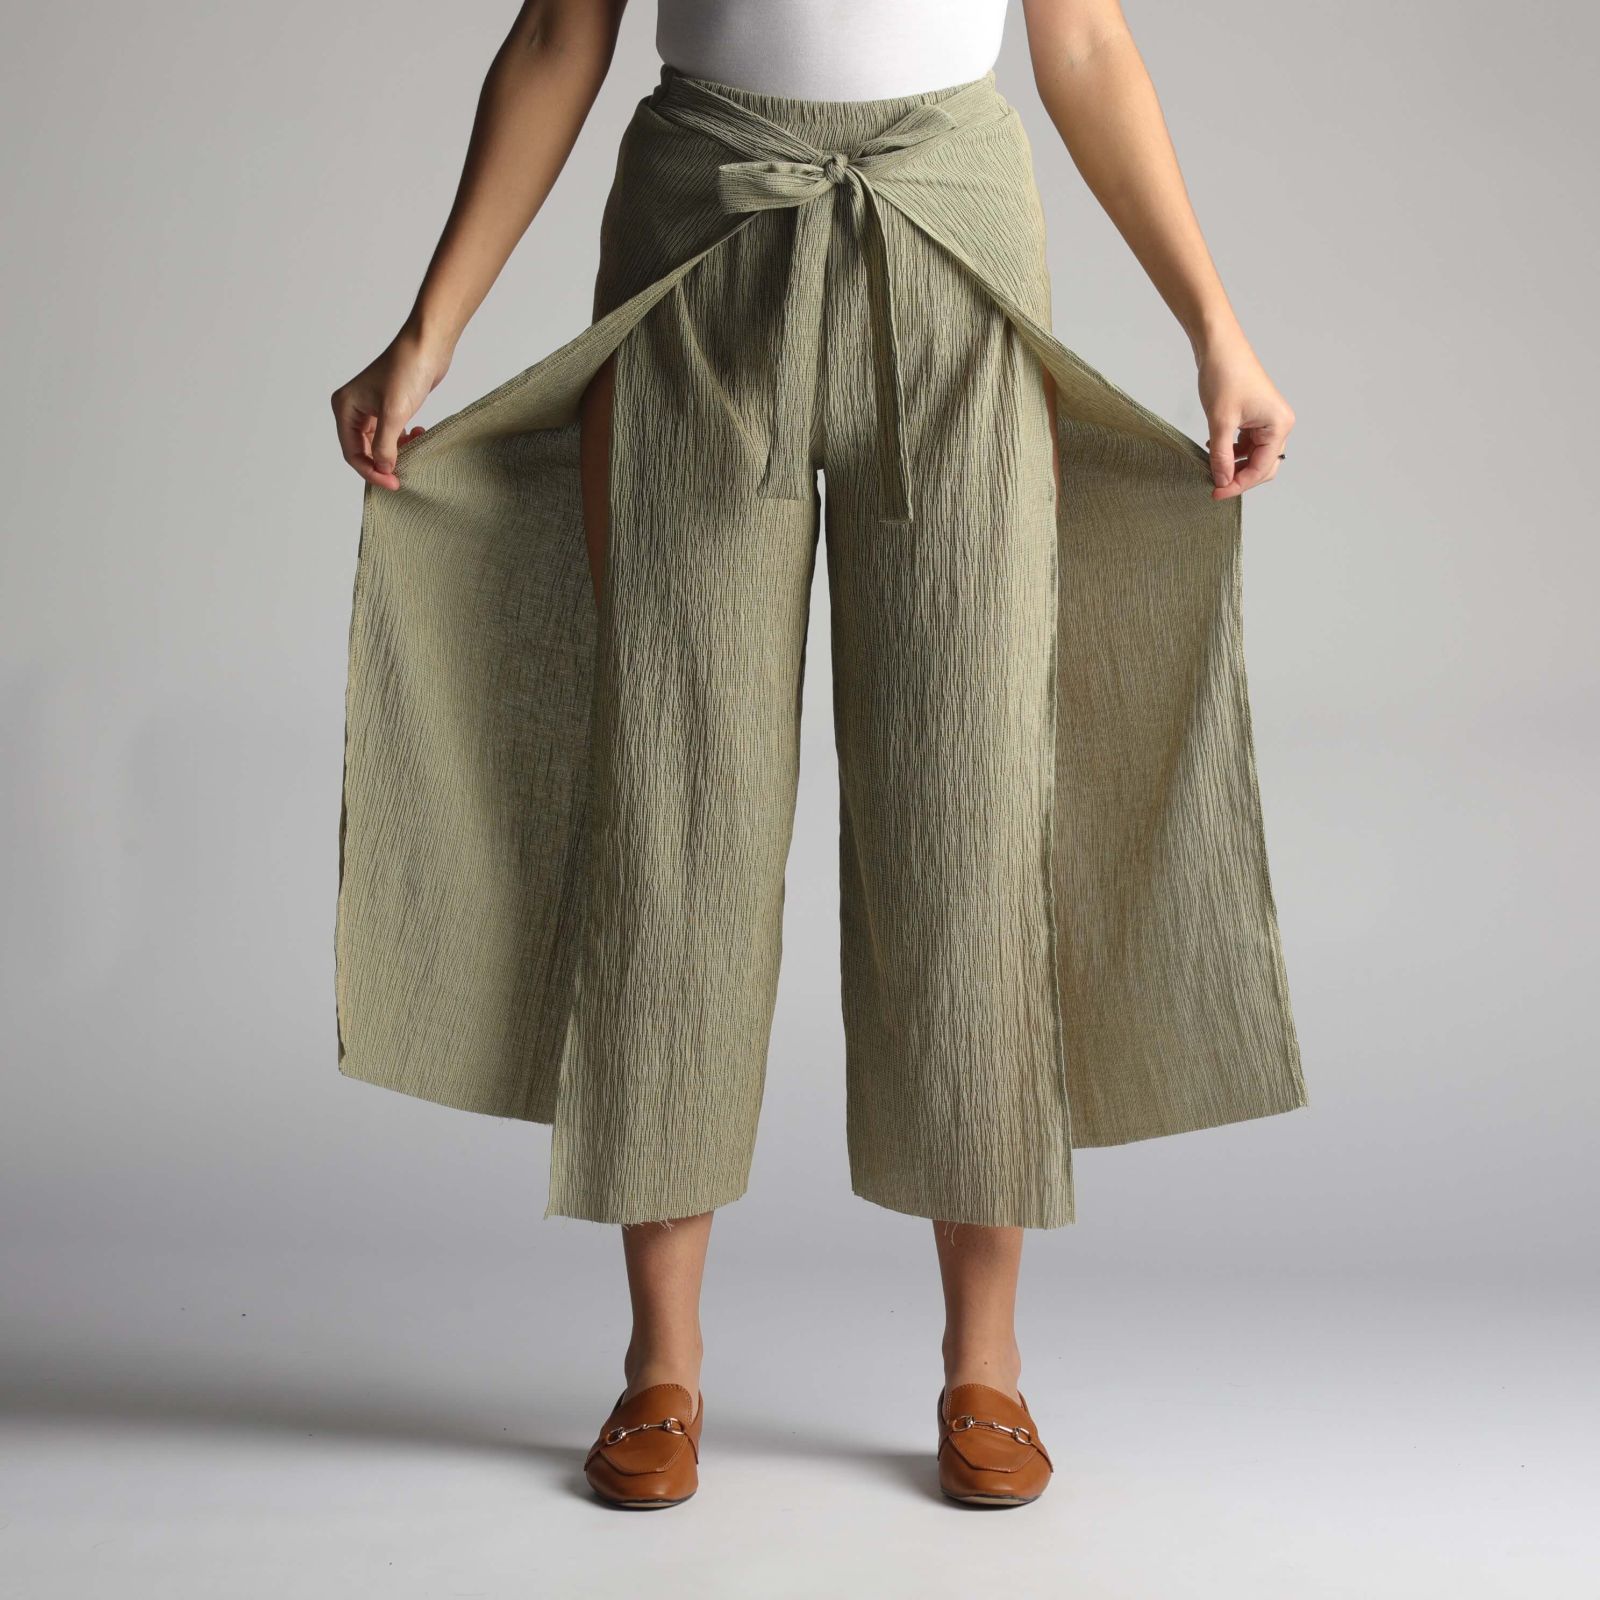 Solada Women's striped culotte trousers: for sale at 9.99€ on Mecshopping.it